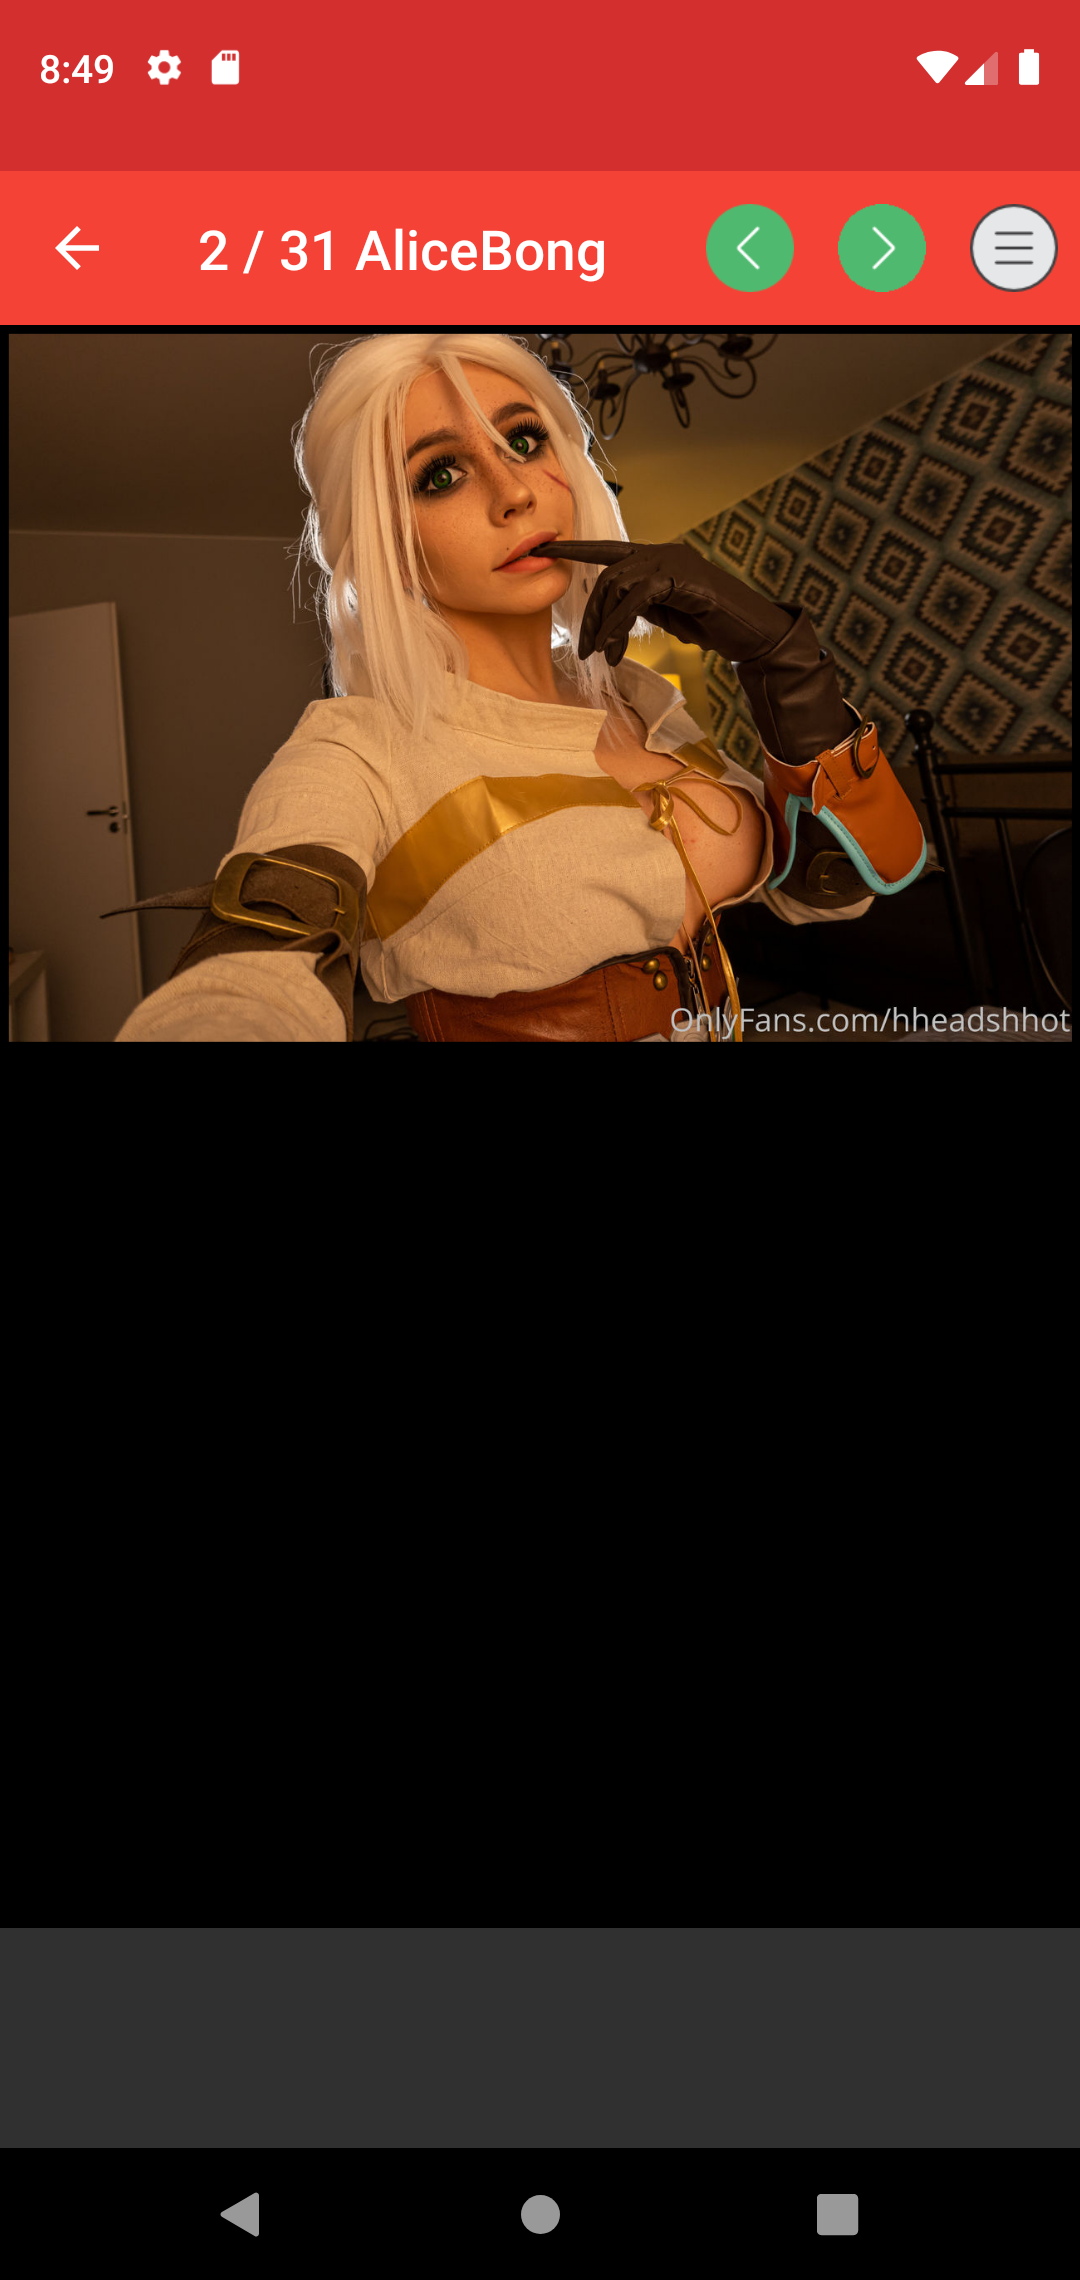 Witcher Cosplays sissy,for,erotic,app,sexy,anime,android,adult,pictures,best,hentei,witcher,comicses,hot,pics,gallery,galleries,apps,cosplay,apk,comics,hentai,aplikasi